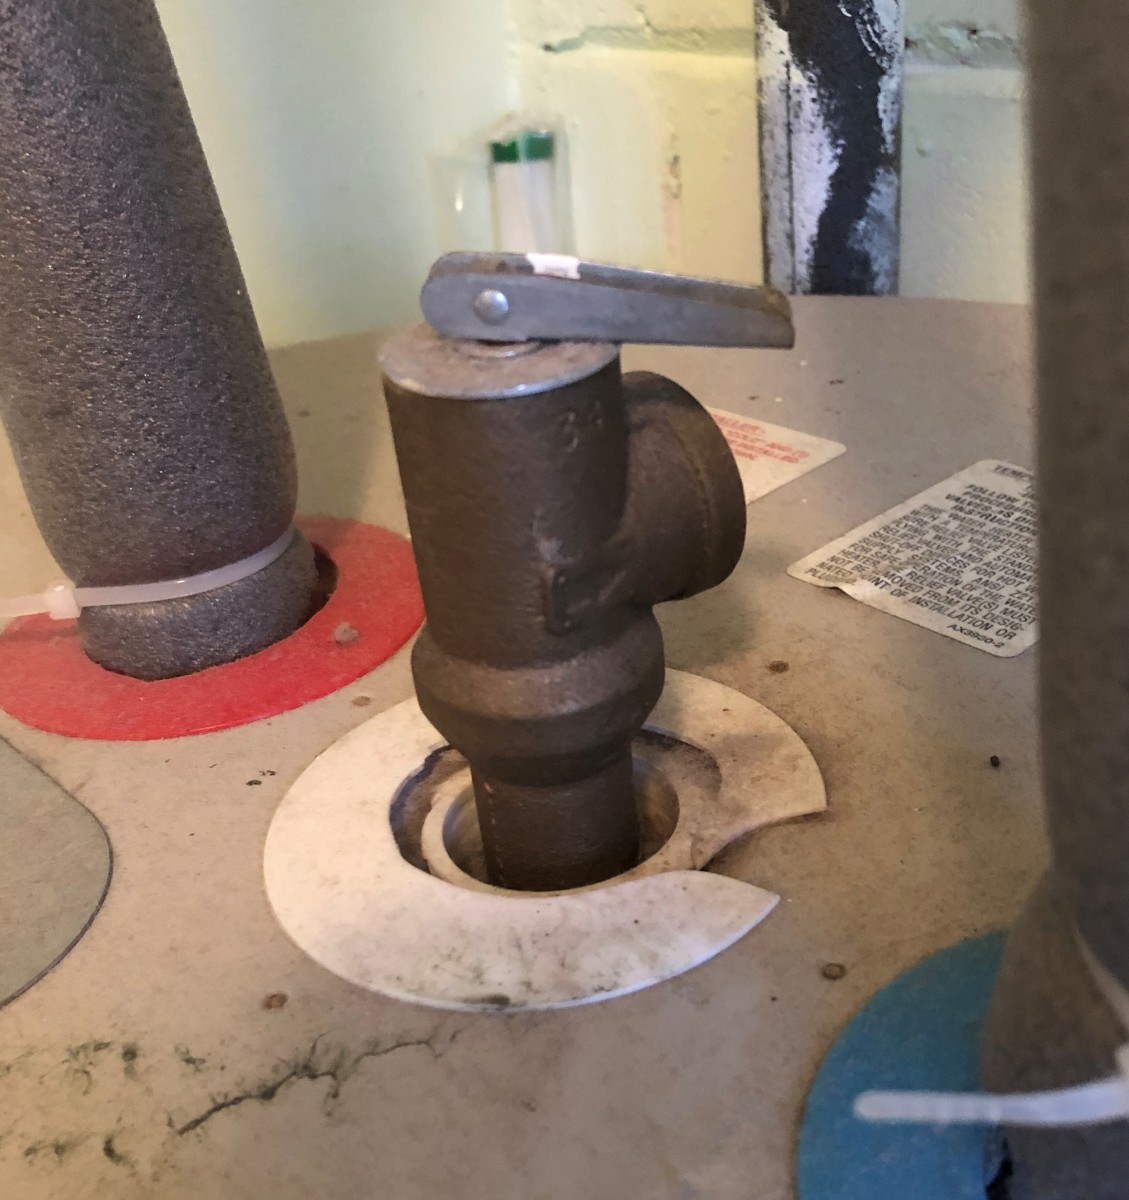 A pressure relief valve opens before tank pressure reaches a dangerous level. The installer failed to connect a drain pipe.